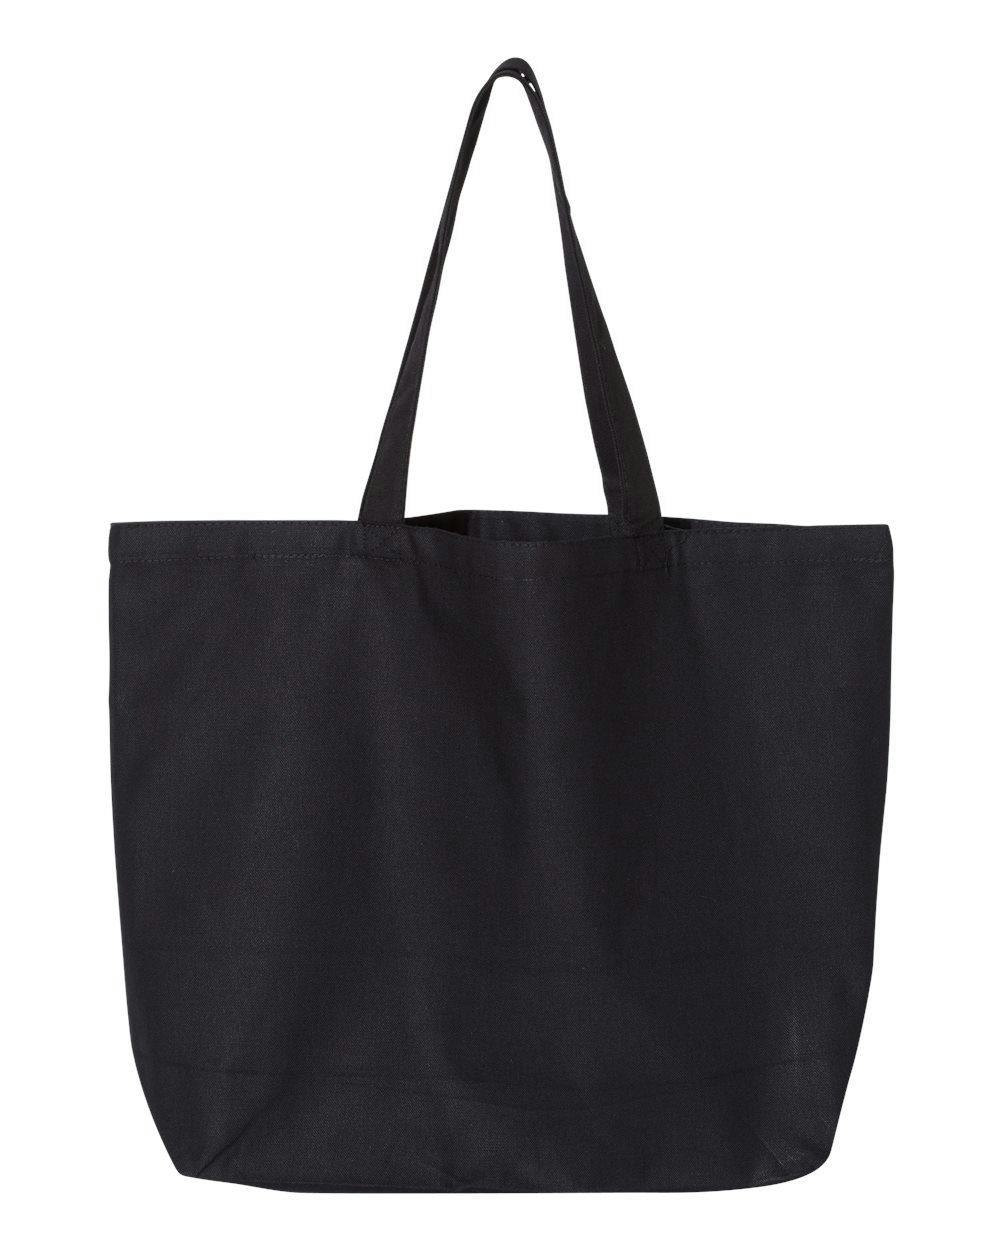 Image for Jumbo Tote - OAD108